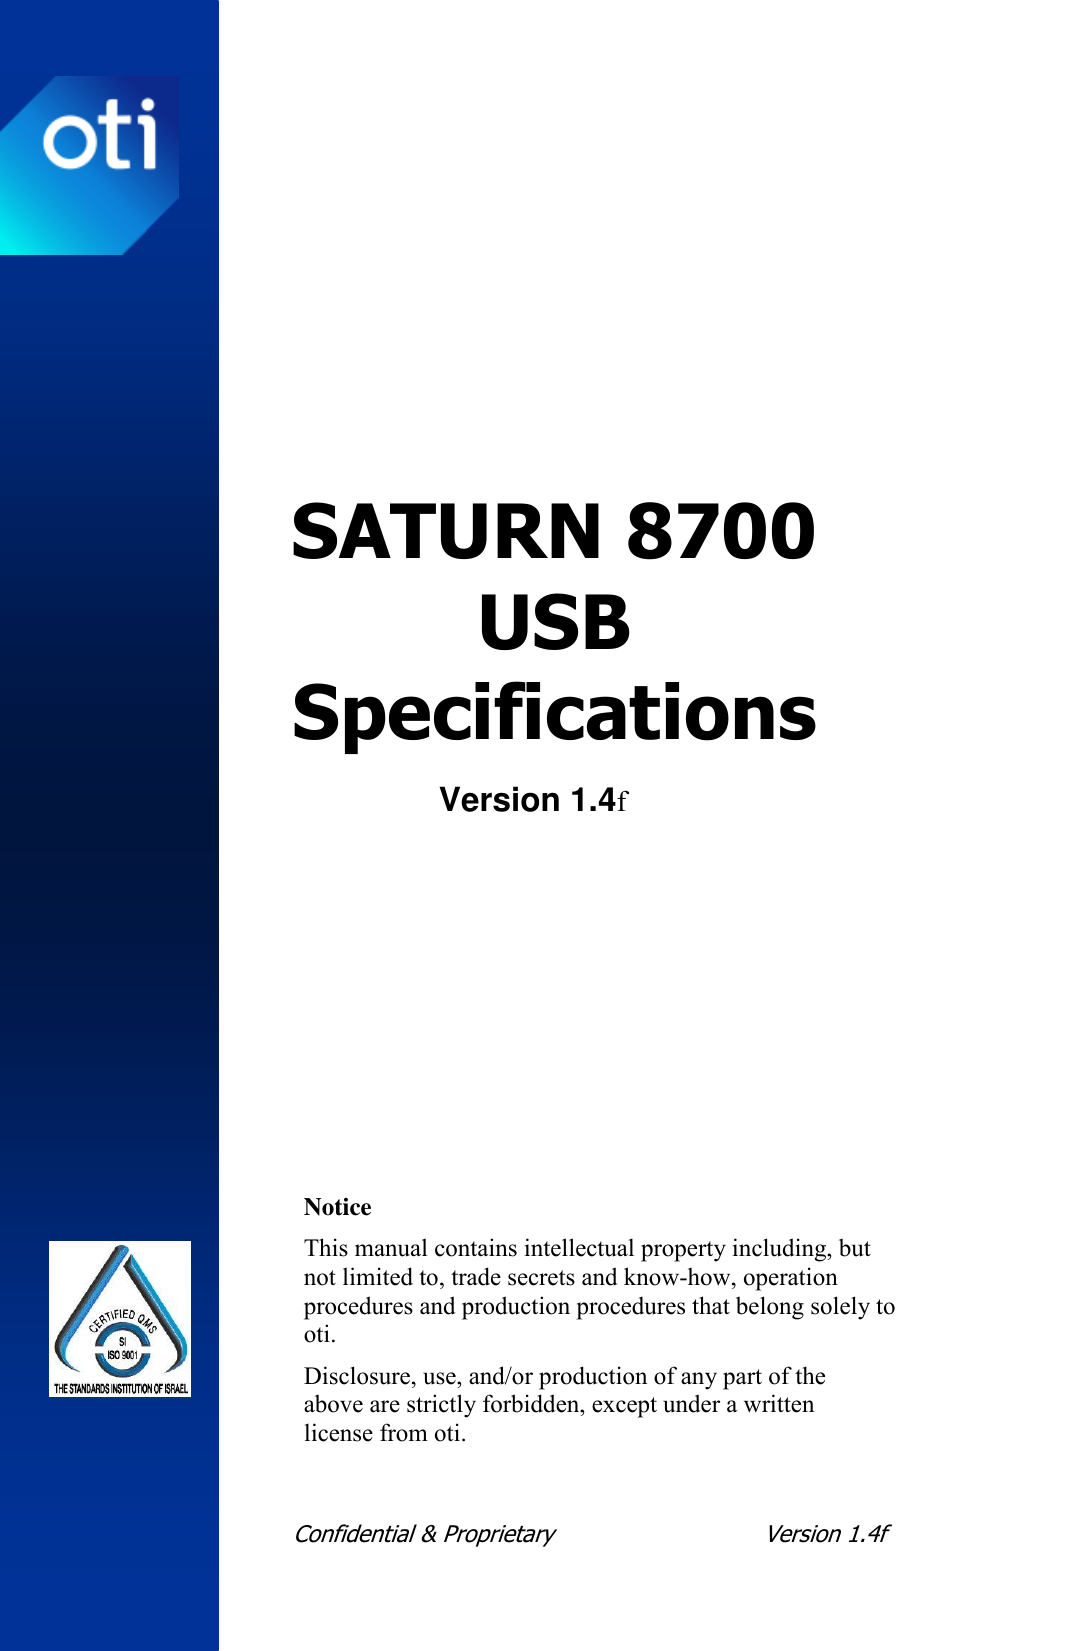  Confidential &amp; Proprietary  Version 1.4f     SATURN 8700 USB  Specifications Version 1.4f     Notice This manual contains intellectual property including, but not limited to, trade secrets and know-how, operation procedures and production procedures that belong solely to oti. Disclosure, use, and/or production of any part of the above are strictly forbidden, except under a written license from oti. 